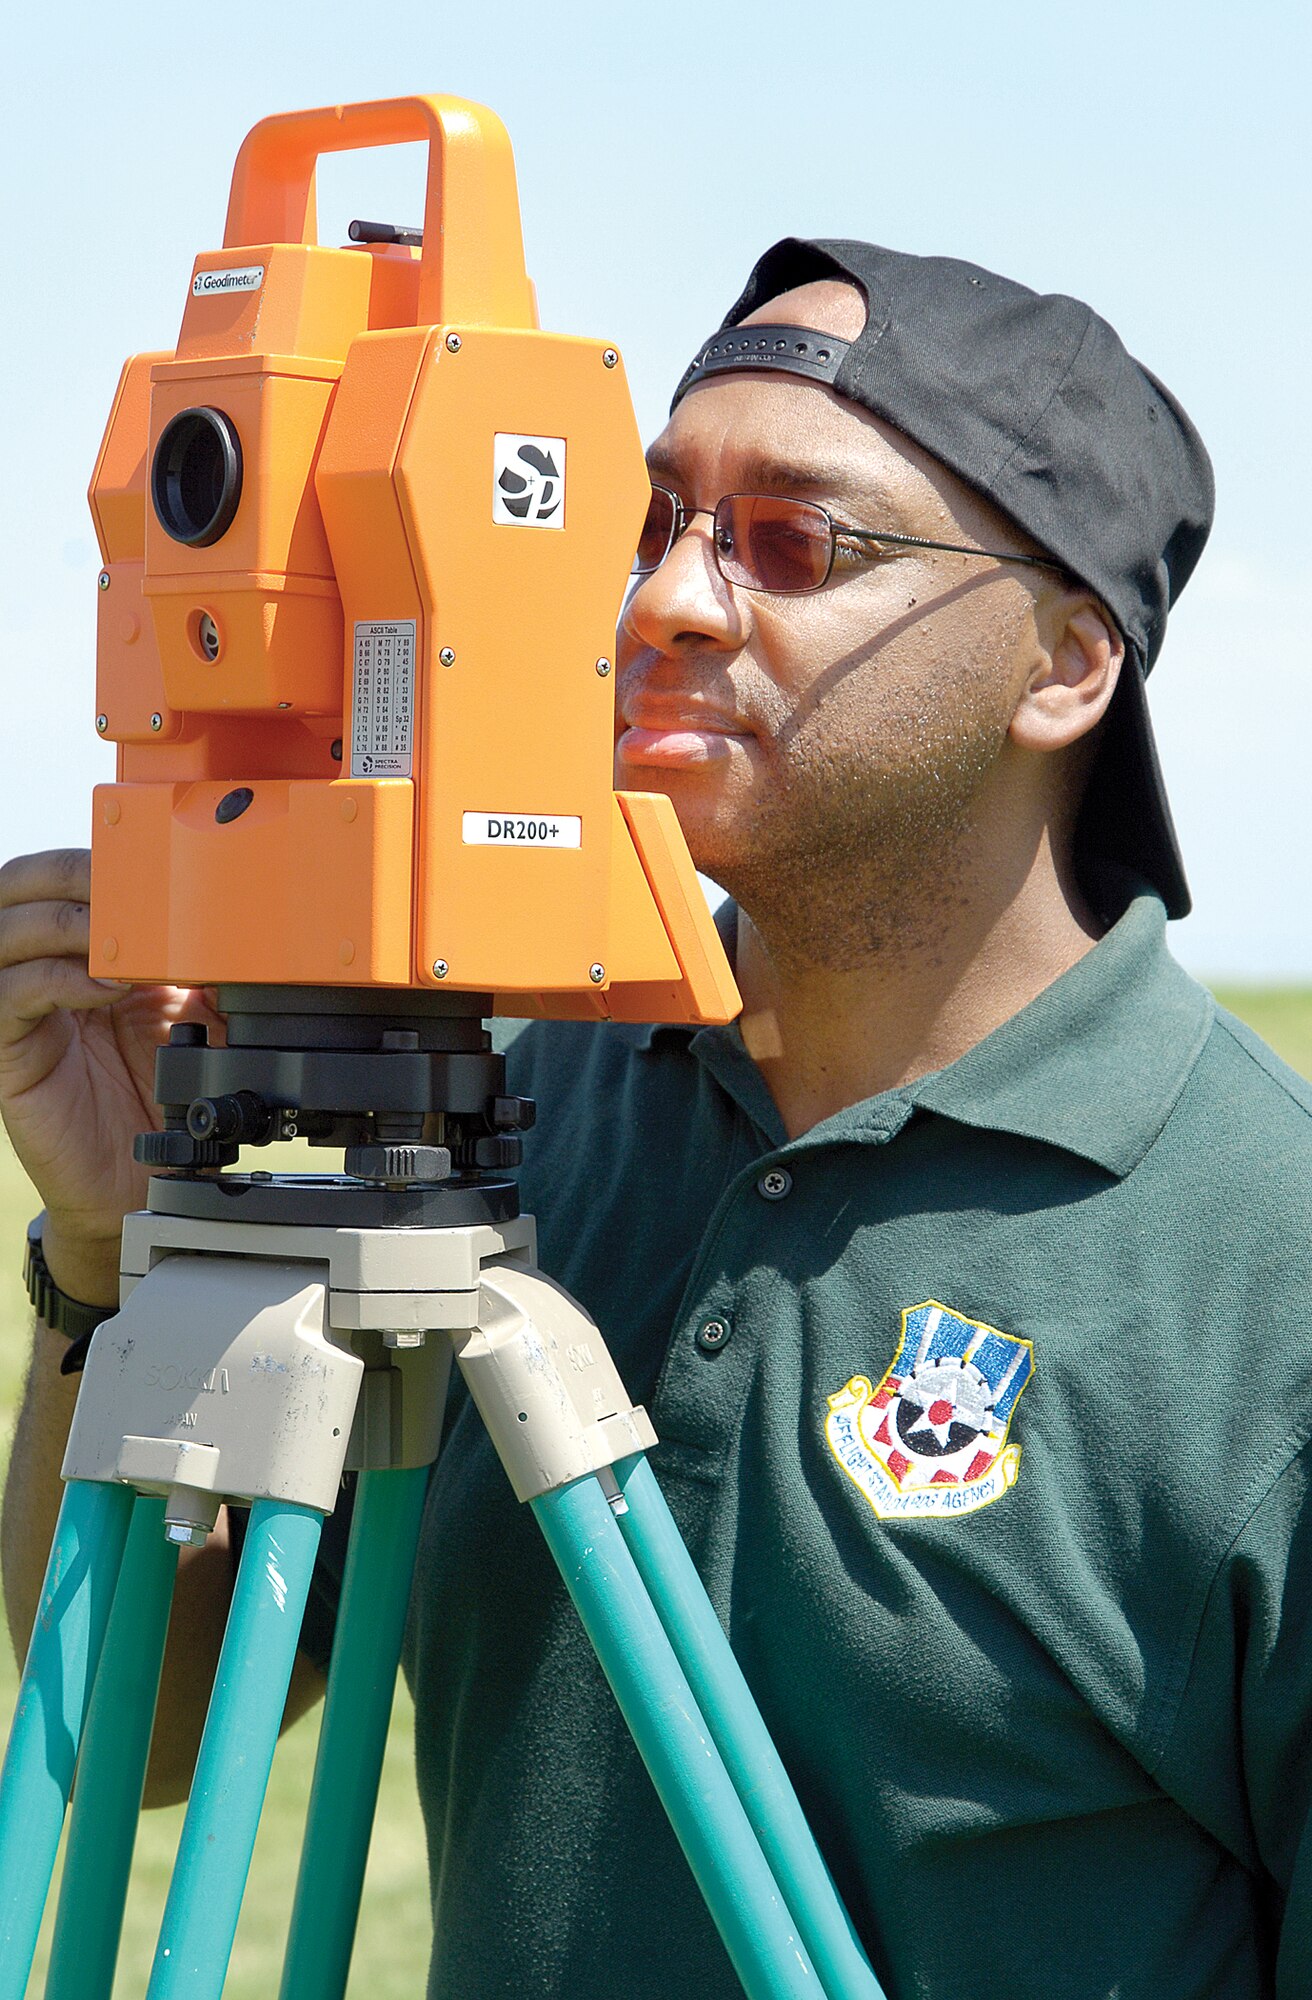 Dwight Bell takes a reading Aug. 31, 2009, during an airfield site inspection.  Mr. Bell is a geodesist with the Air Traffic Control and Landing Systems Evaluation Division of the Air Force Flight Standards Agency in Oklahoma City.  He has traveled the globe surveying and measuring bare base sites and established areas identifying any obstacles that would interfere with or degrade communication or air traffic control systems' radar signals. (U.S. Air Force photo/Margo Wright)